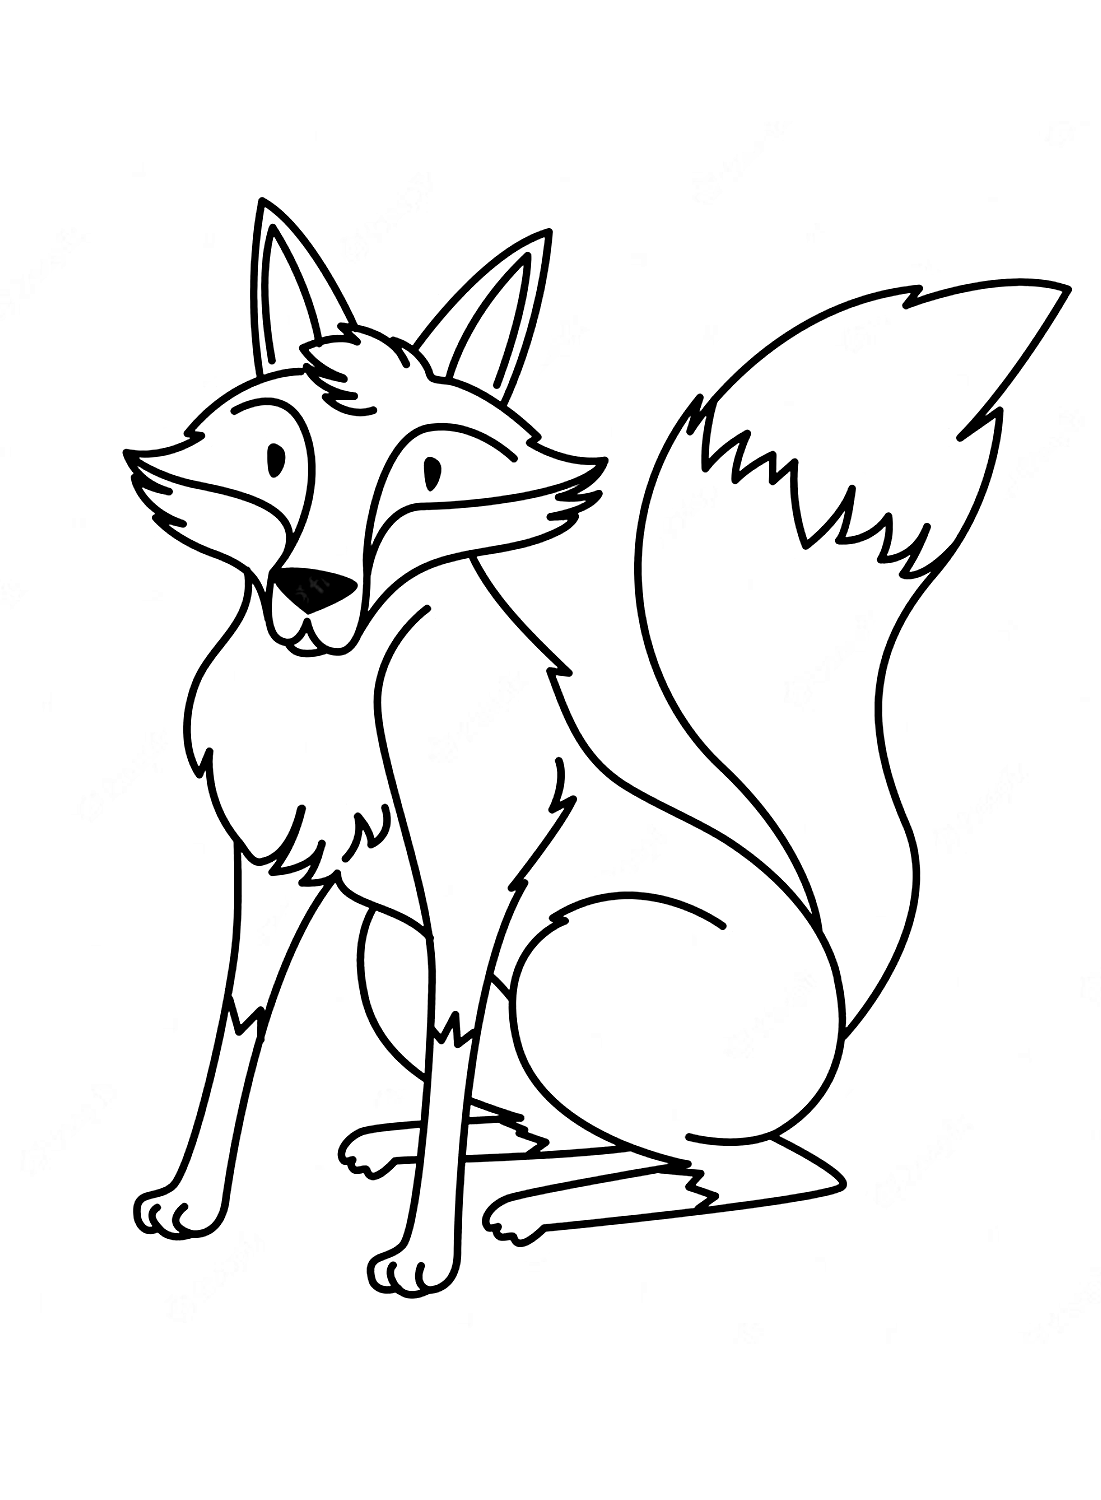 Printable Fox to color - Free Printable Coloring Pages